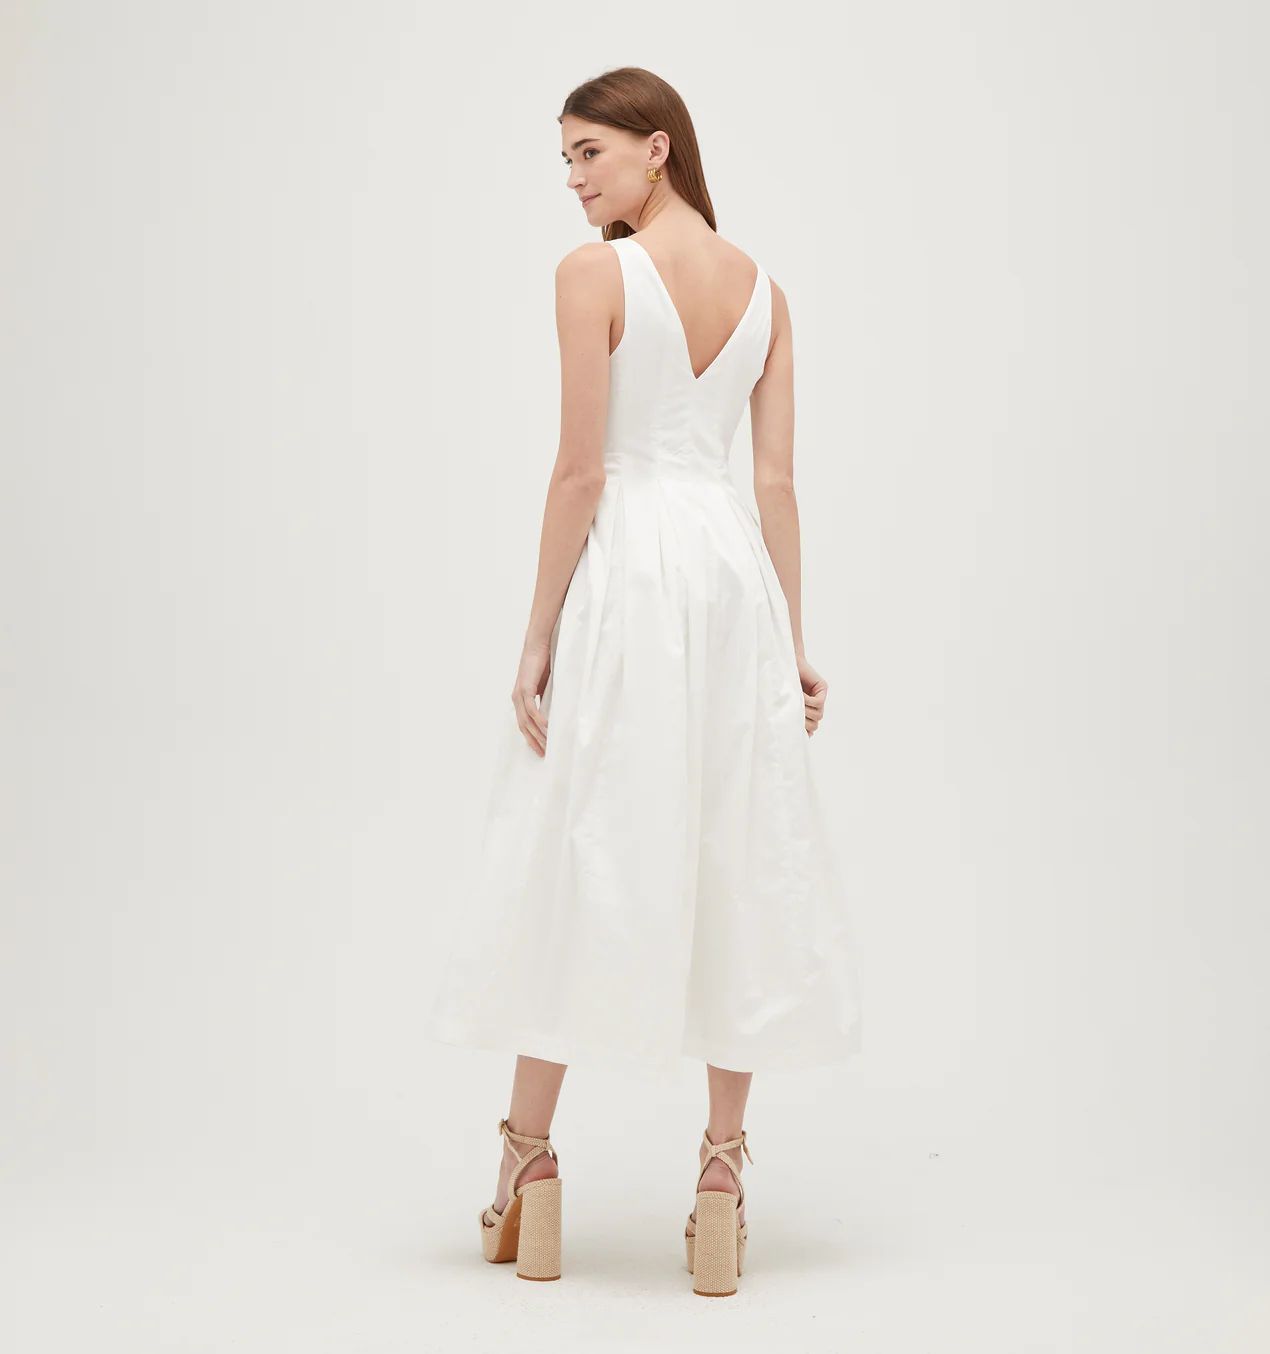 The Jacqueline Dress - White Cotton Sateen | Hill House Home